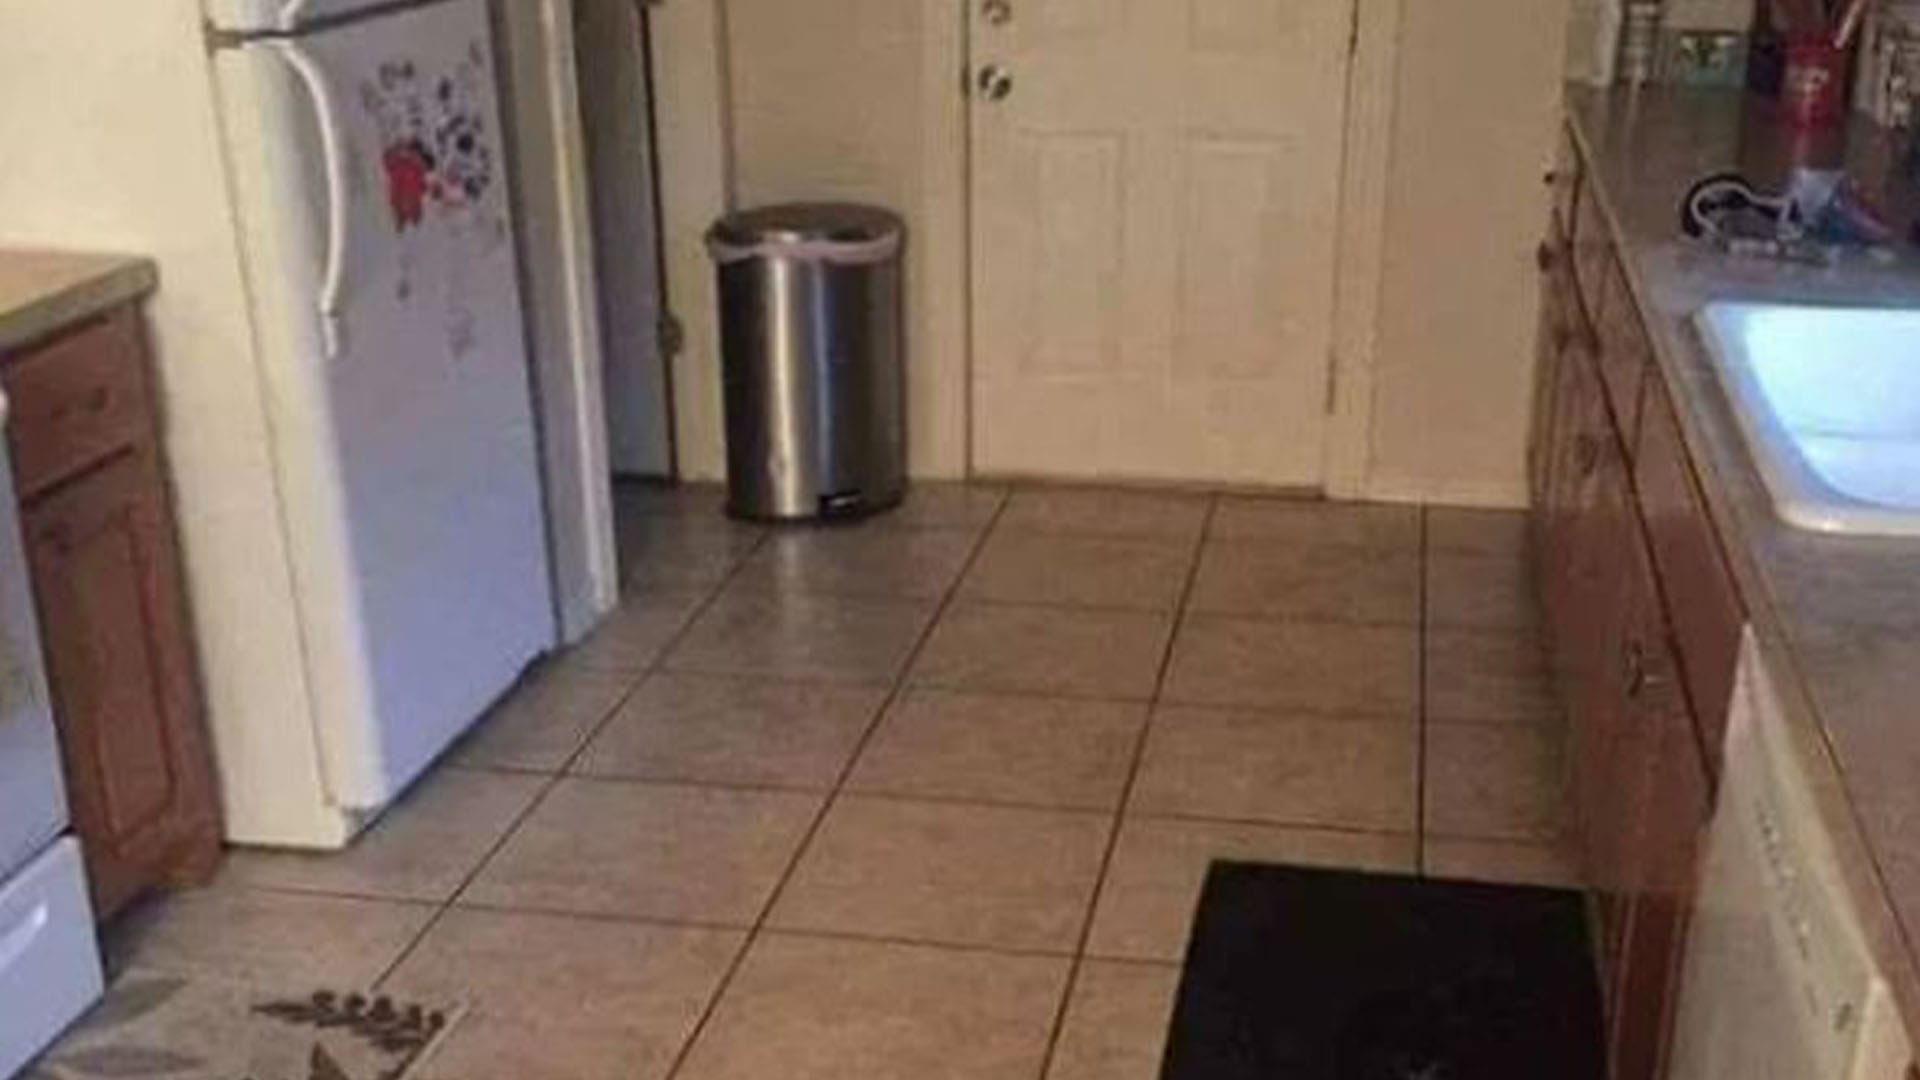 You have X-ray vision if you can spot the camouflaged dog lurking in the kitchen in under 20 seconds